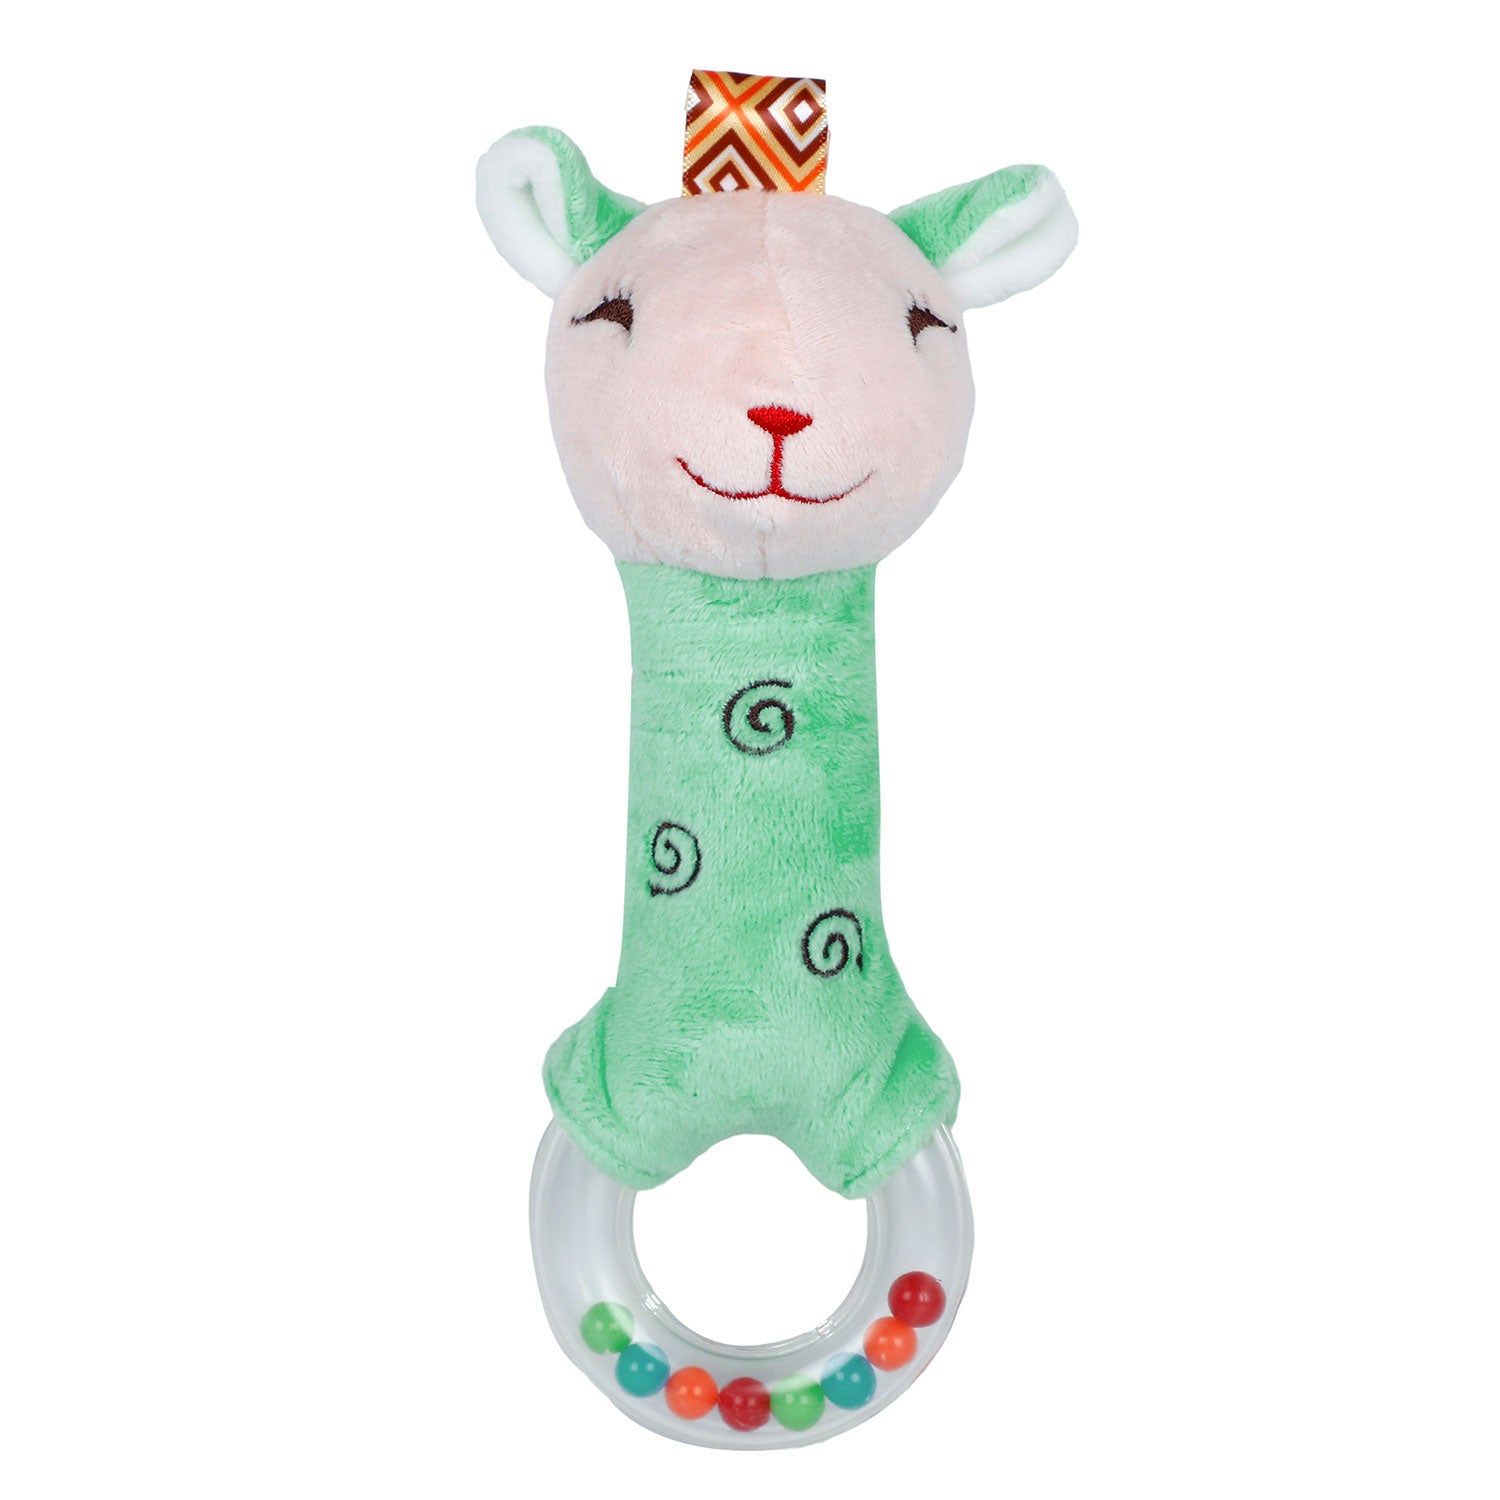 Baby Moo Lovely Animal Squeaker Sound Handheld Rattle Toy - Green